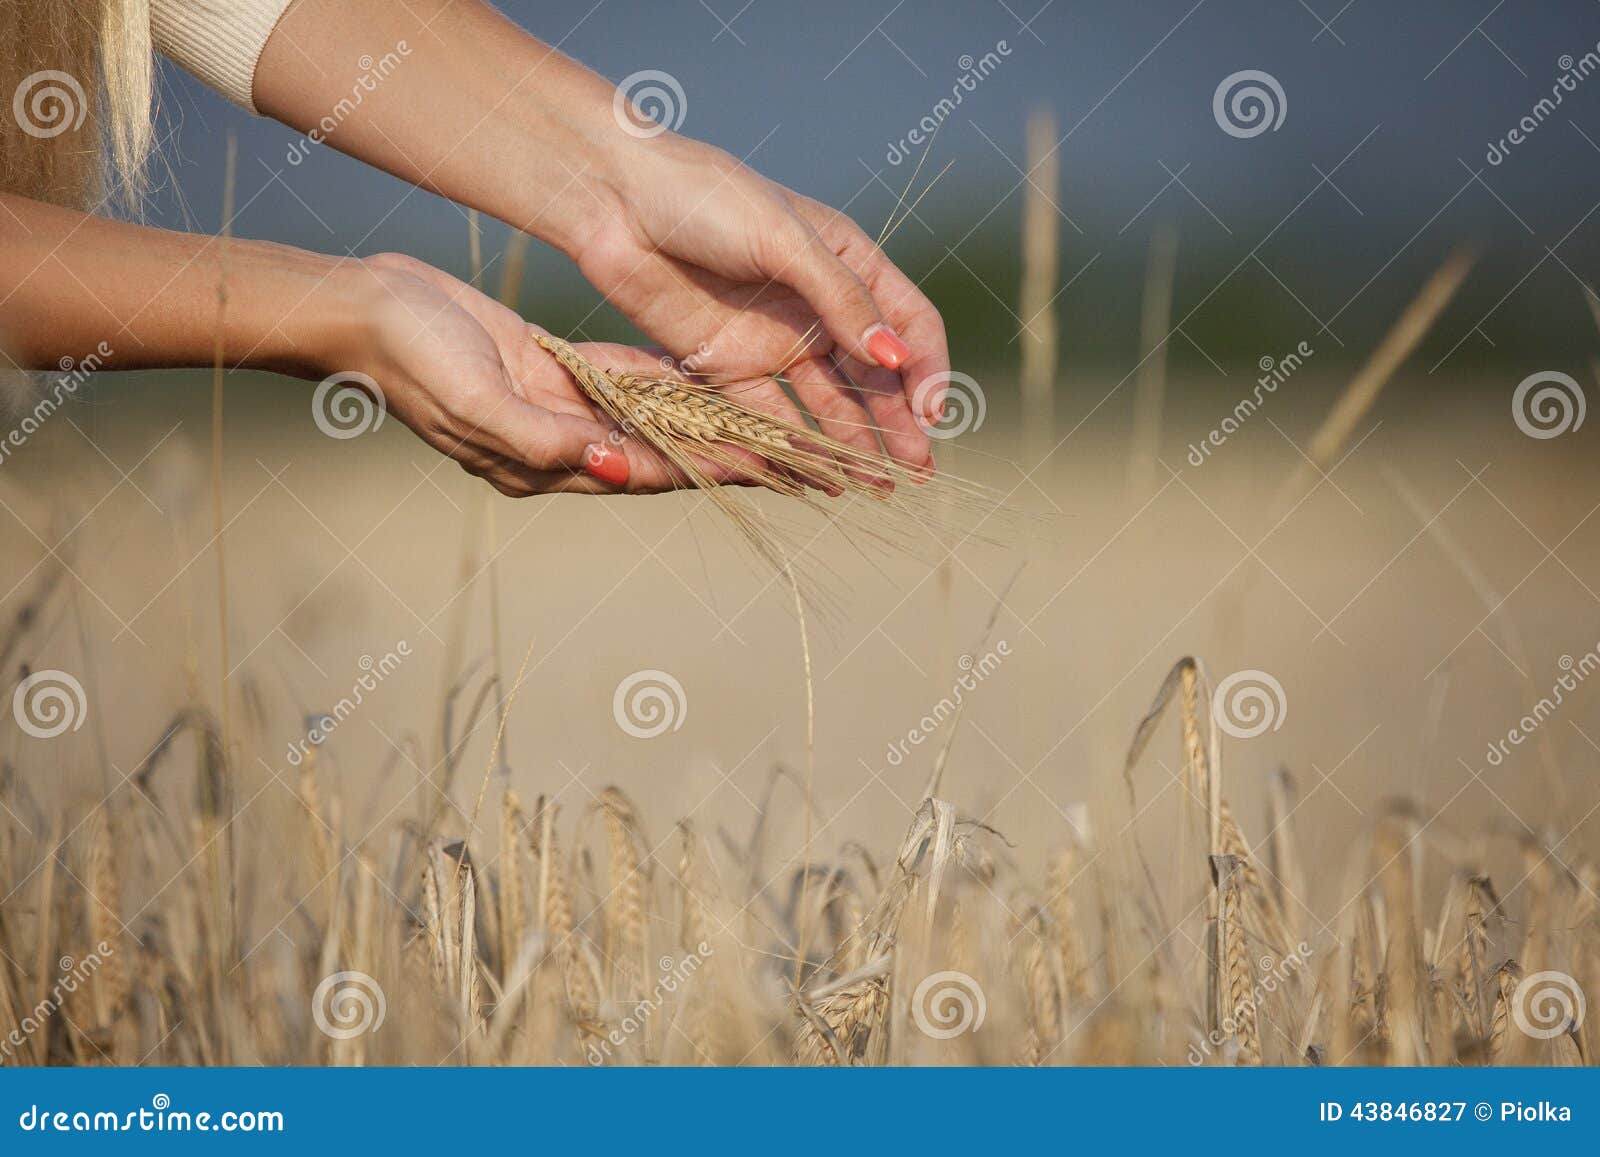 woman hand with corn